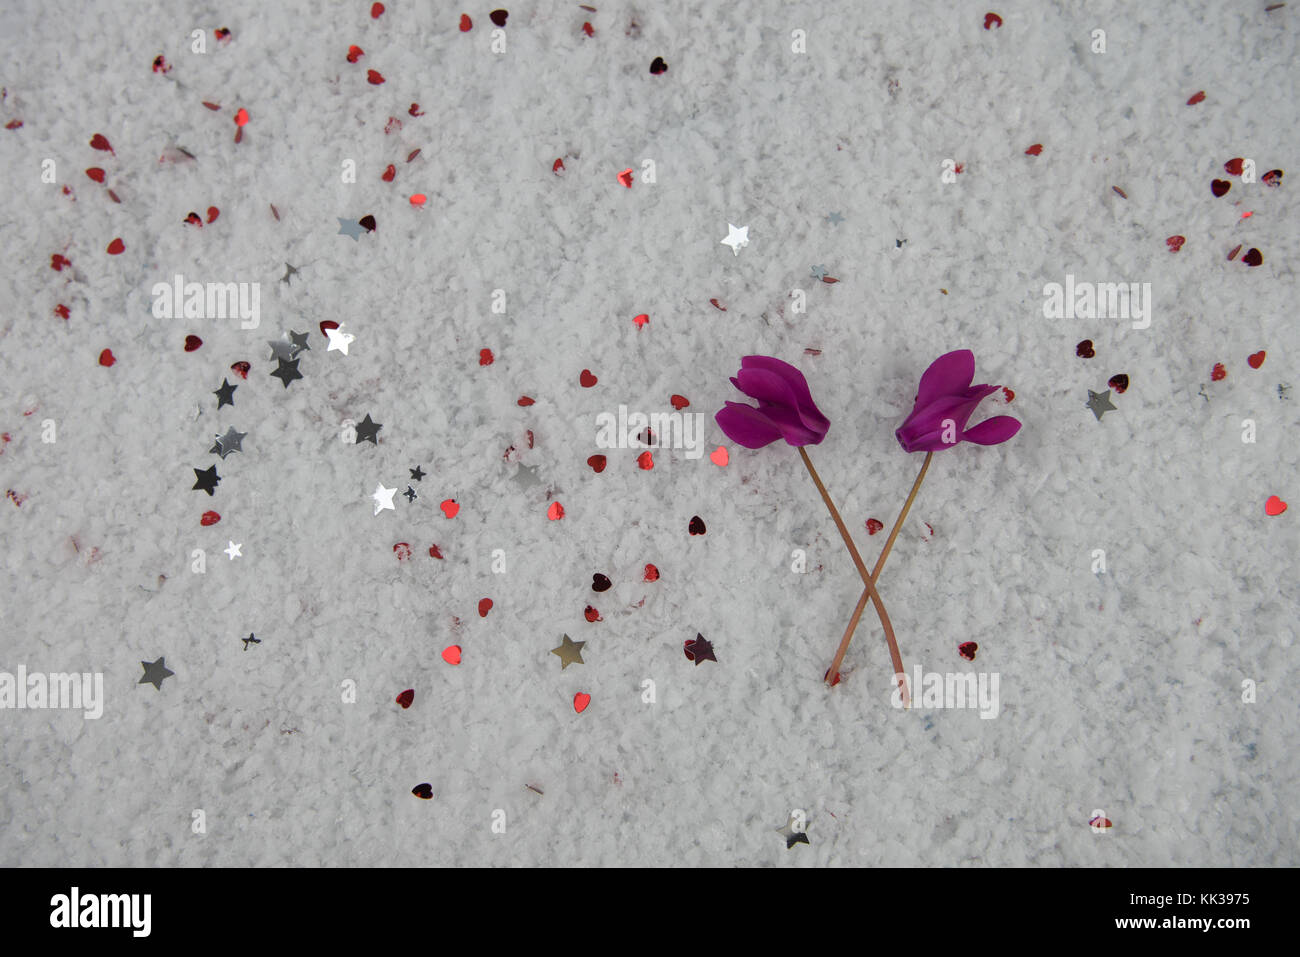 winter photography image with fresh cut seasonal flowers of pink purple cyclamen in snow and sprinkled with small red hearts and silver stars Stock Photo